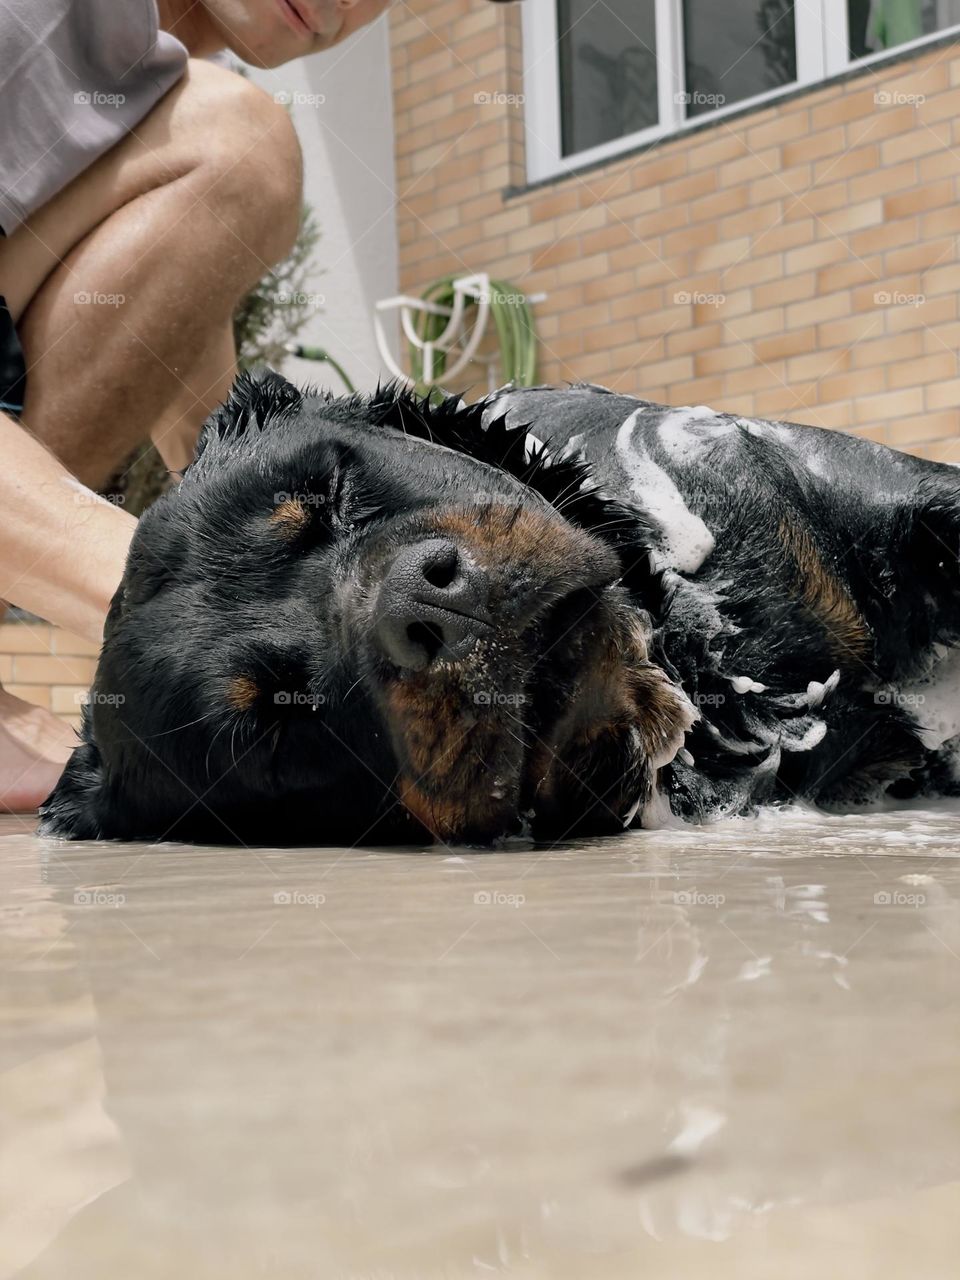 Refreshing bath in the Rottweiler on a hot day